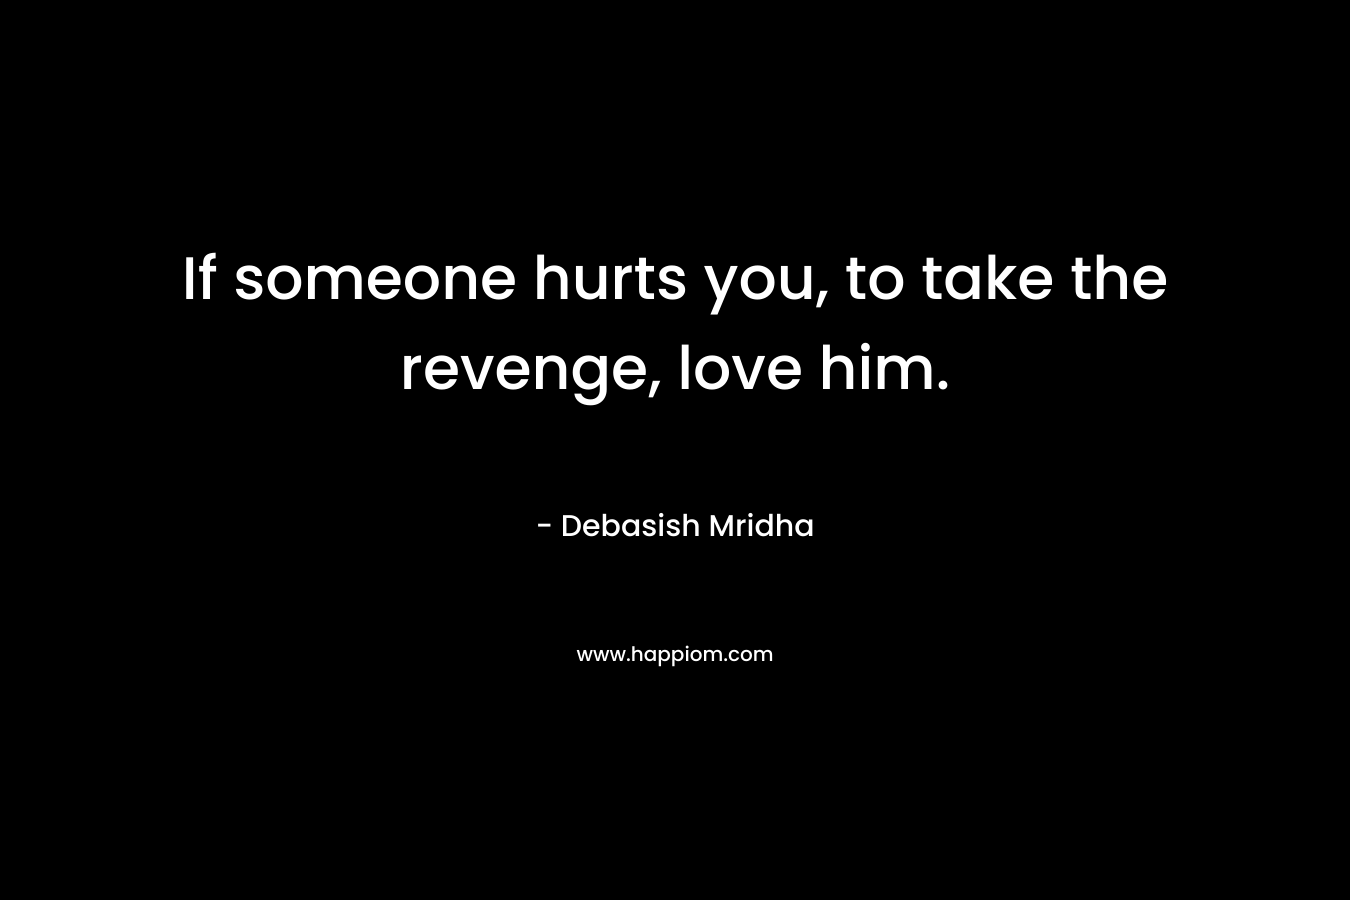 If someone hurts you, to take the revenge, love him.